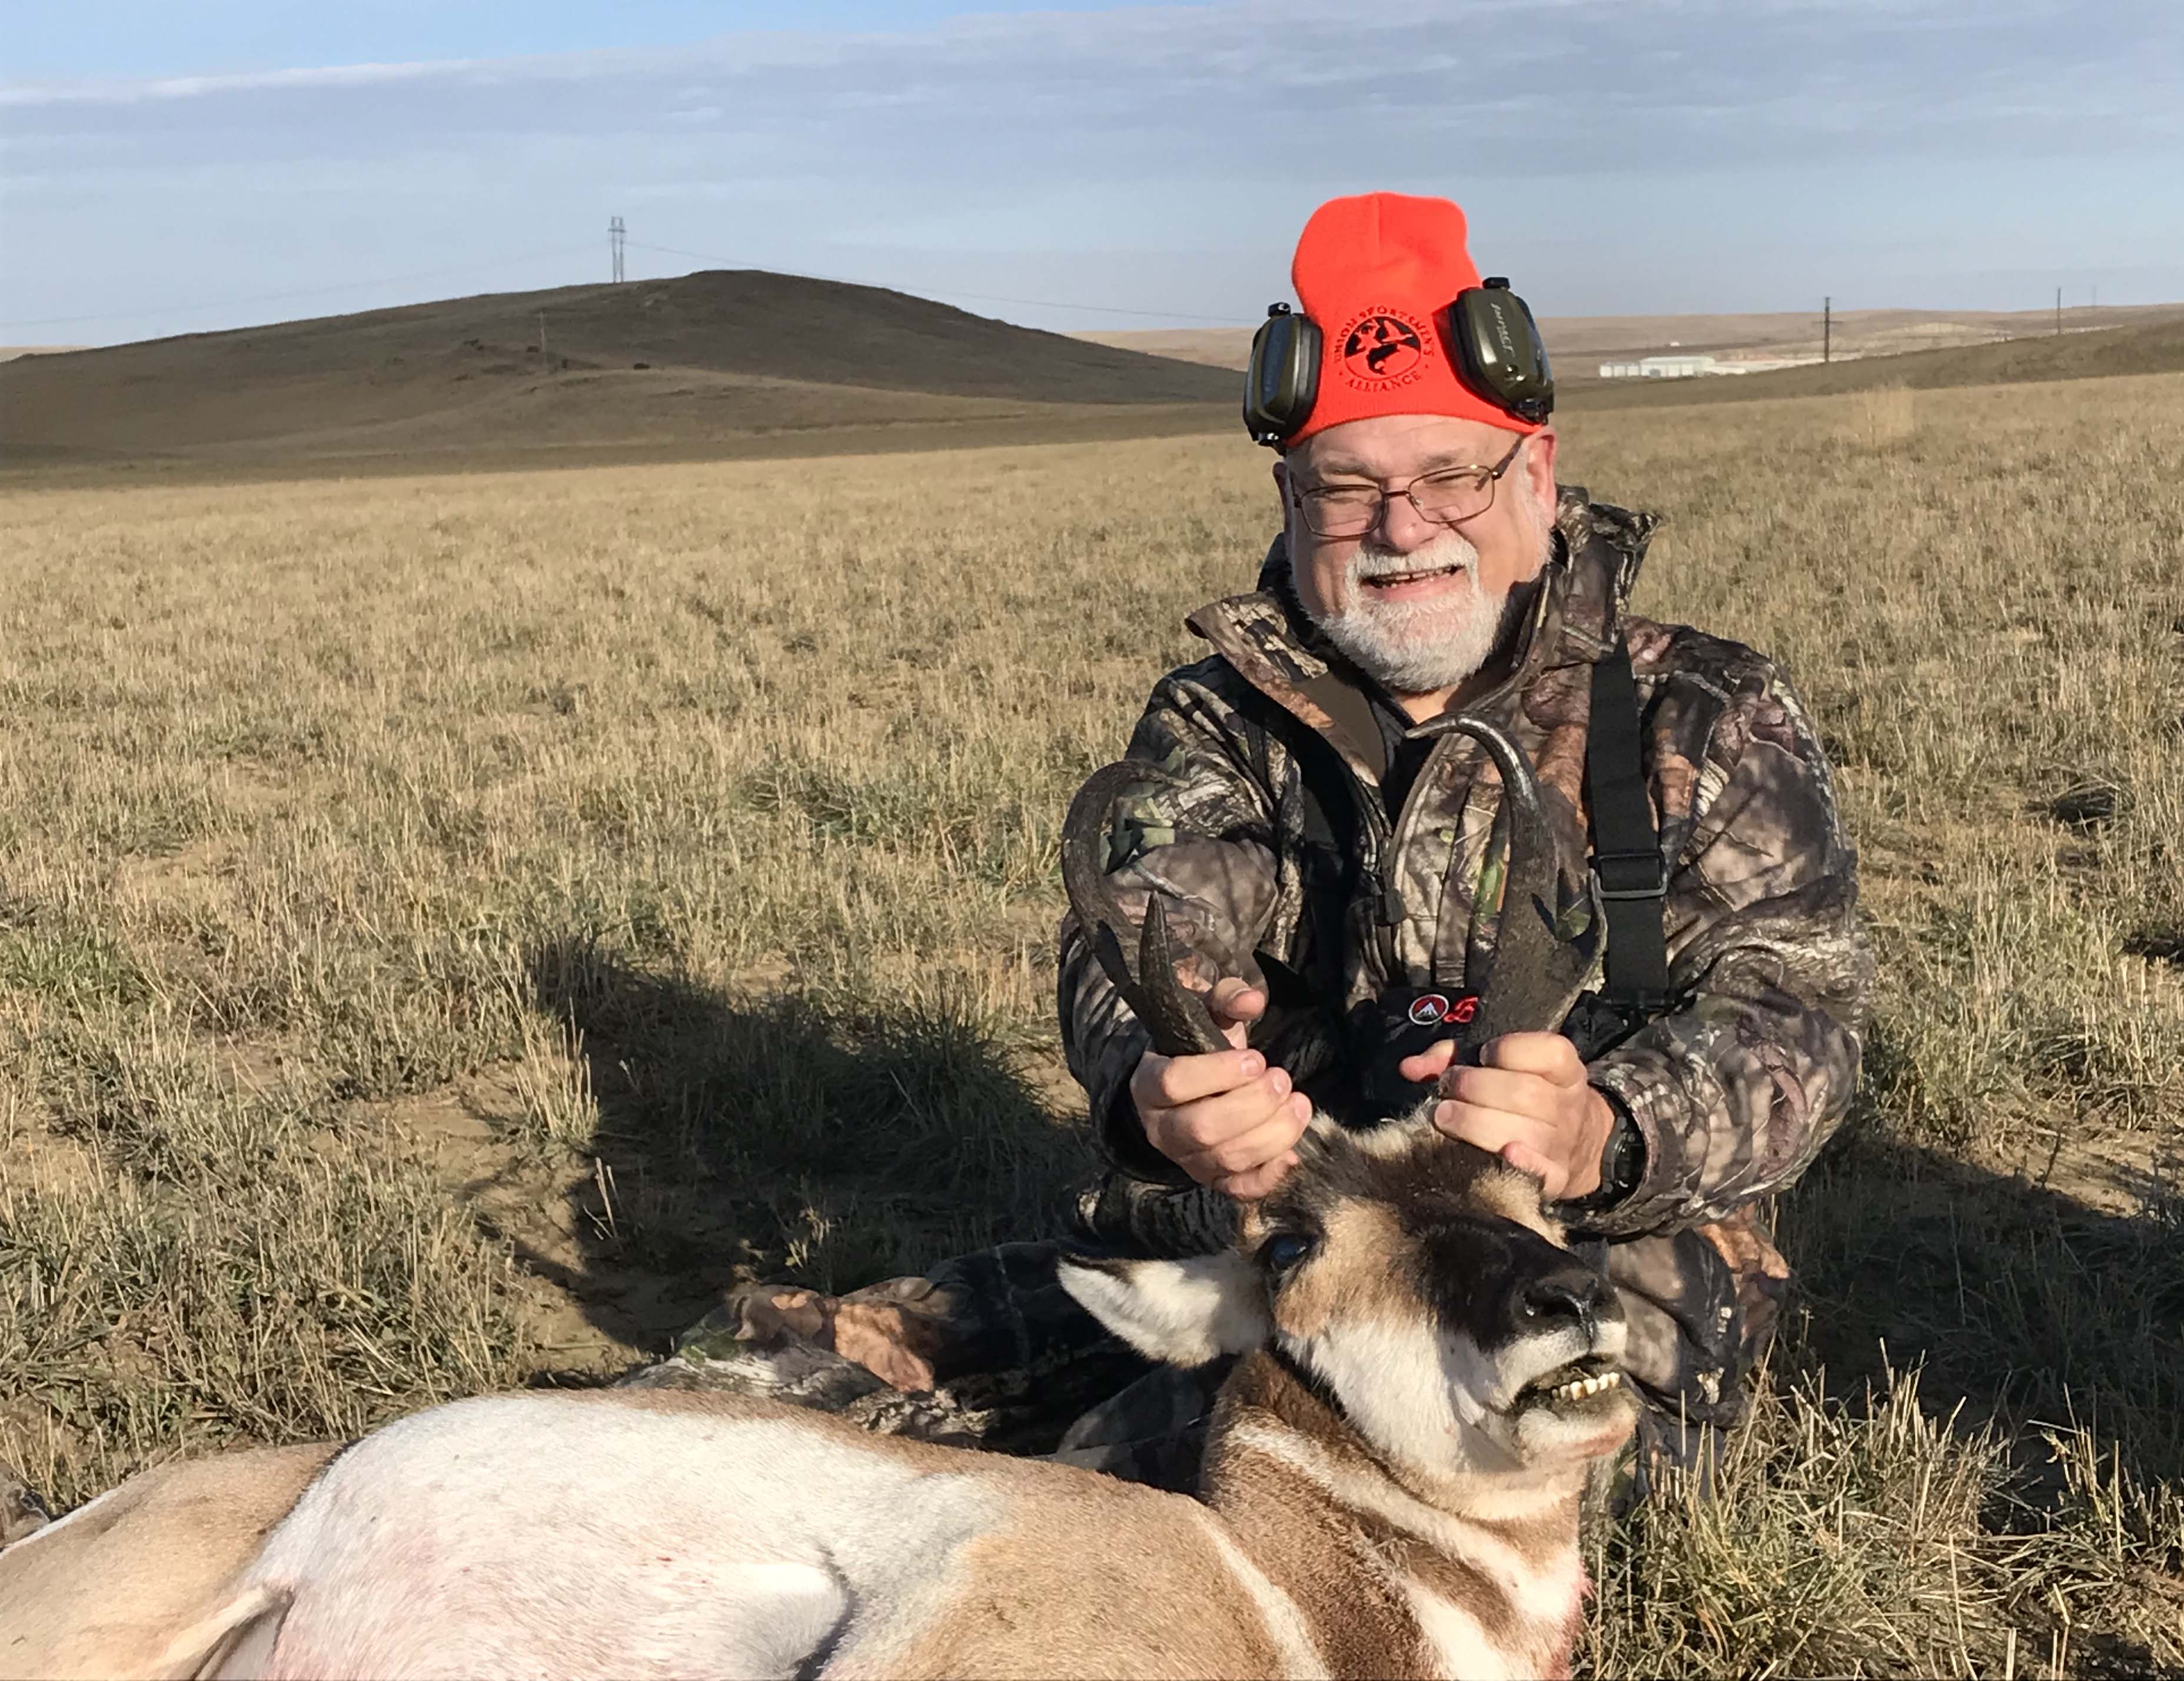 Chicago IAM Local 48 Member to be Featured on USA’s ‘Brotherhood Outdoors’